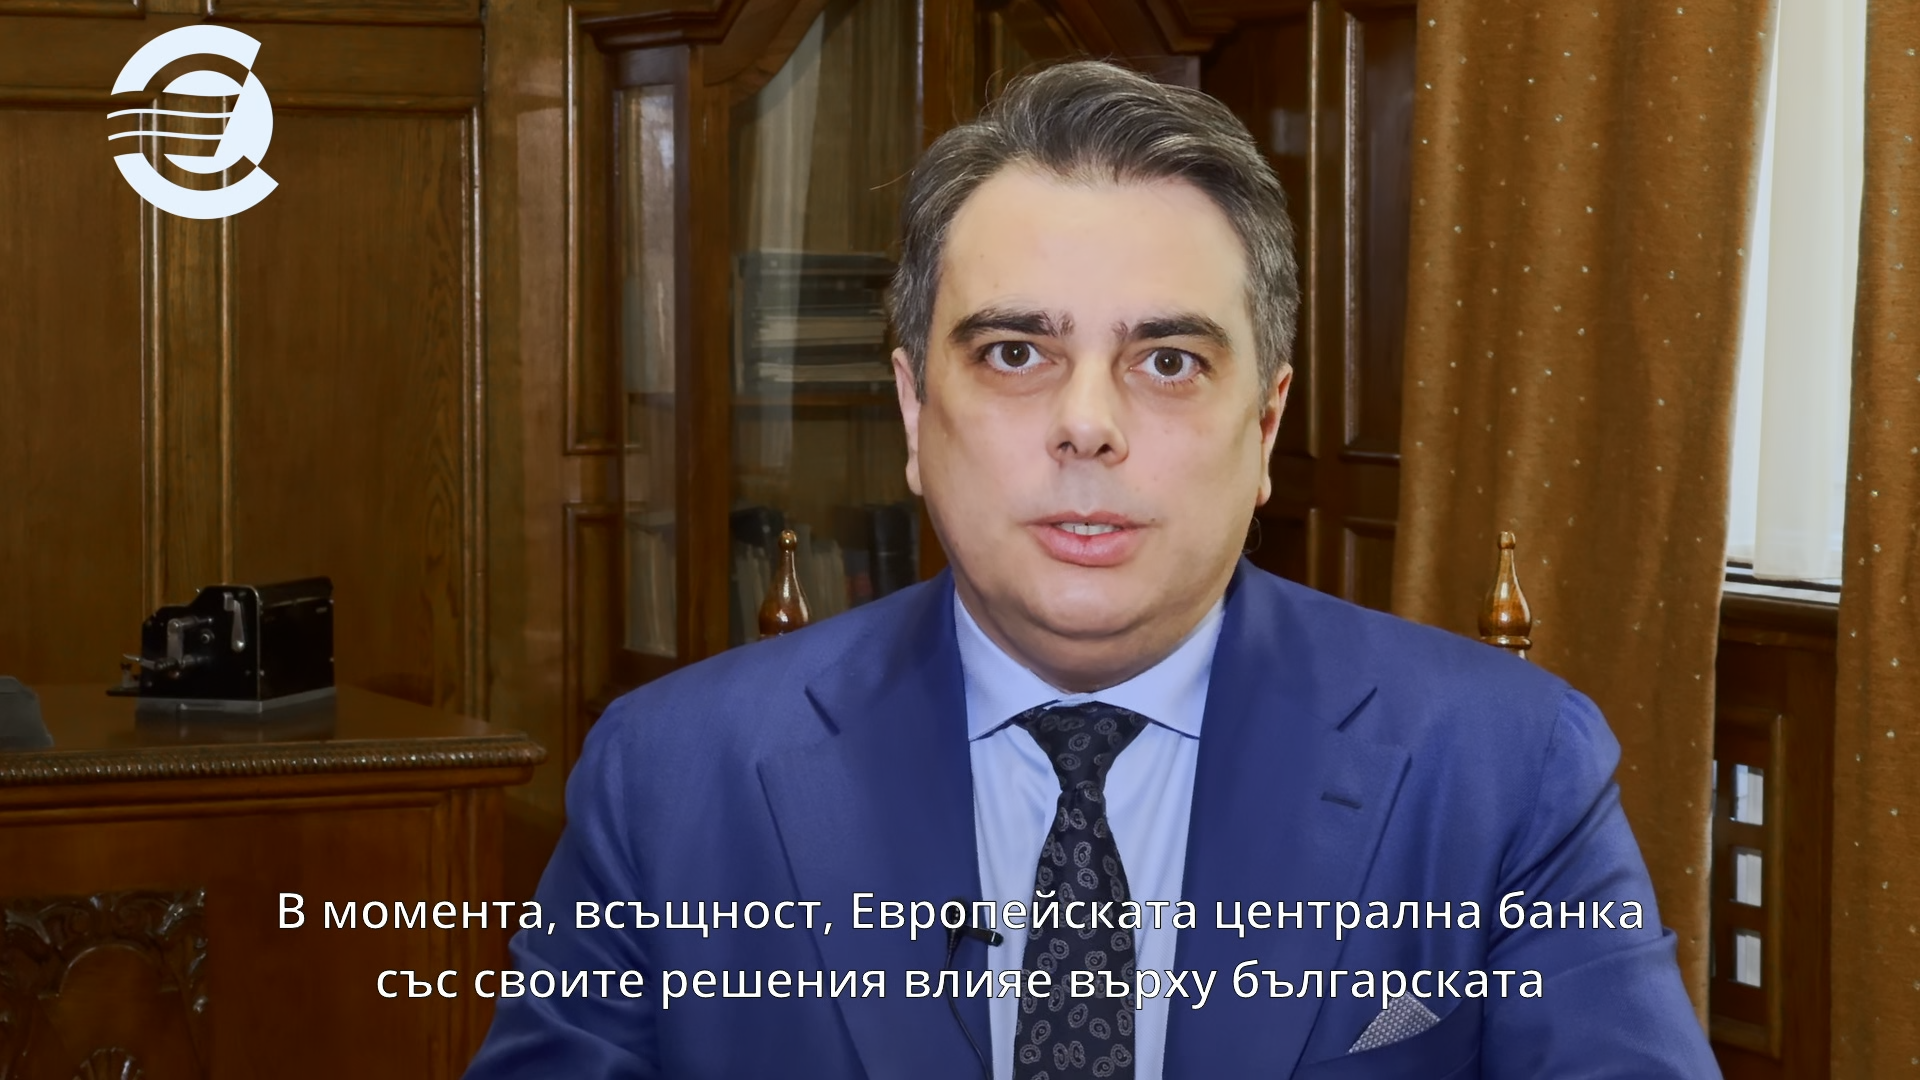 Assen Vassilev, Minister of Finance: This is an extremely important step for Bulgaria, because together with other European countries we will be able to determine the monetary policy of Europe